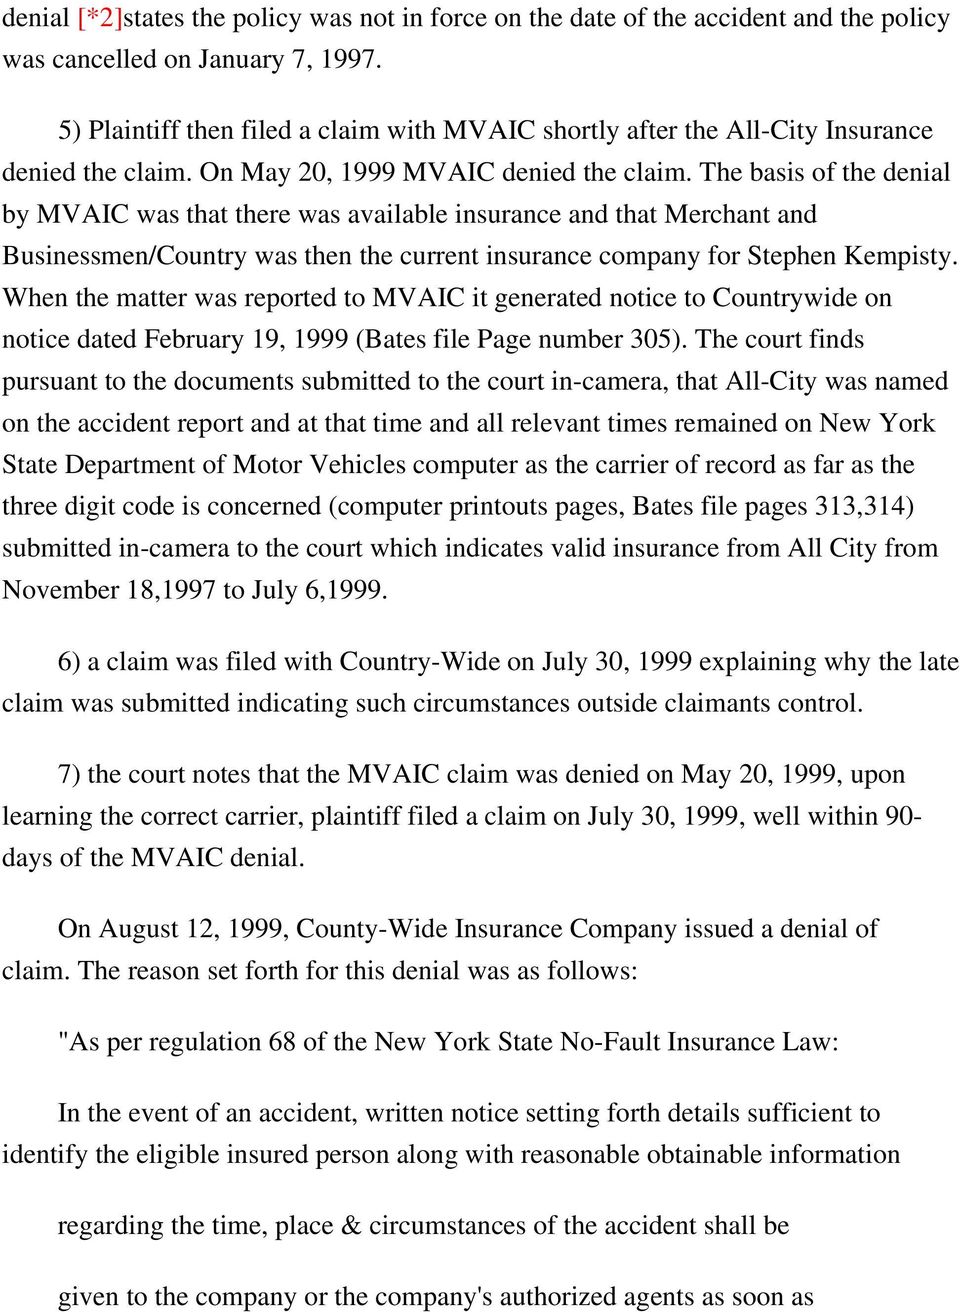 The basis of the denial by MVAIC was that there was available insurance and that Merchant and Businessmen/Country was then the current insurance company for Stephen Kempisty.